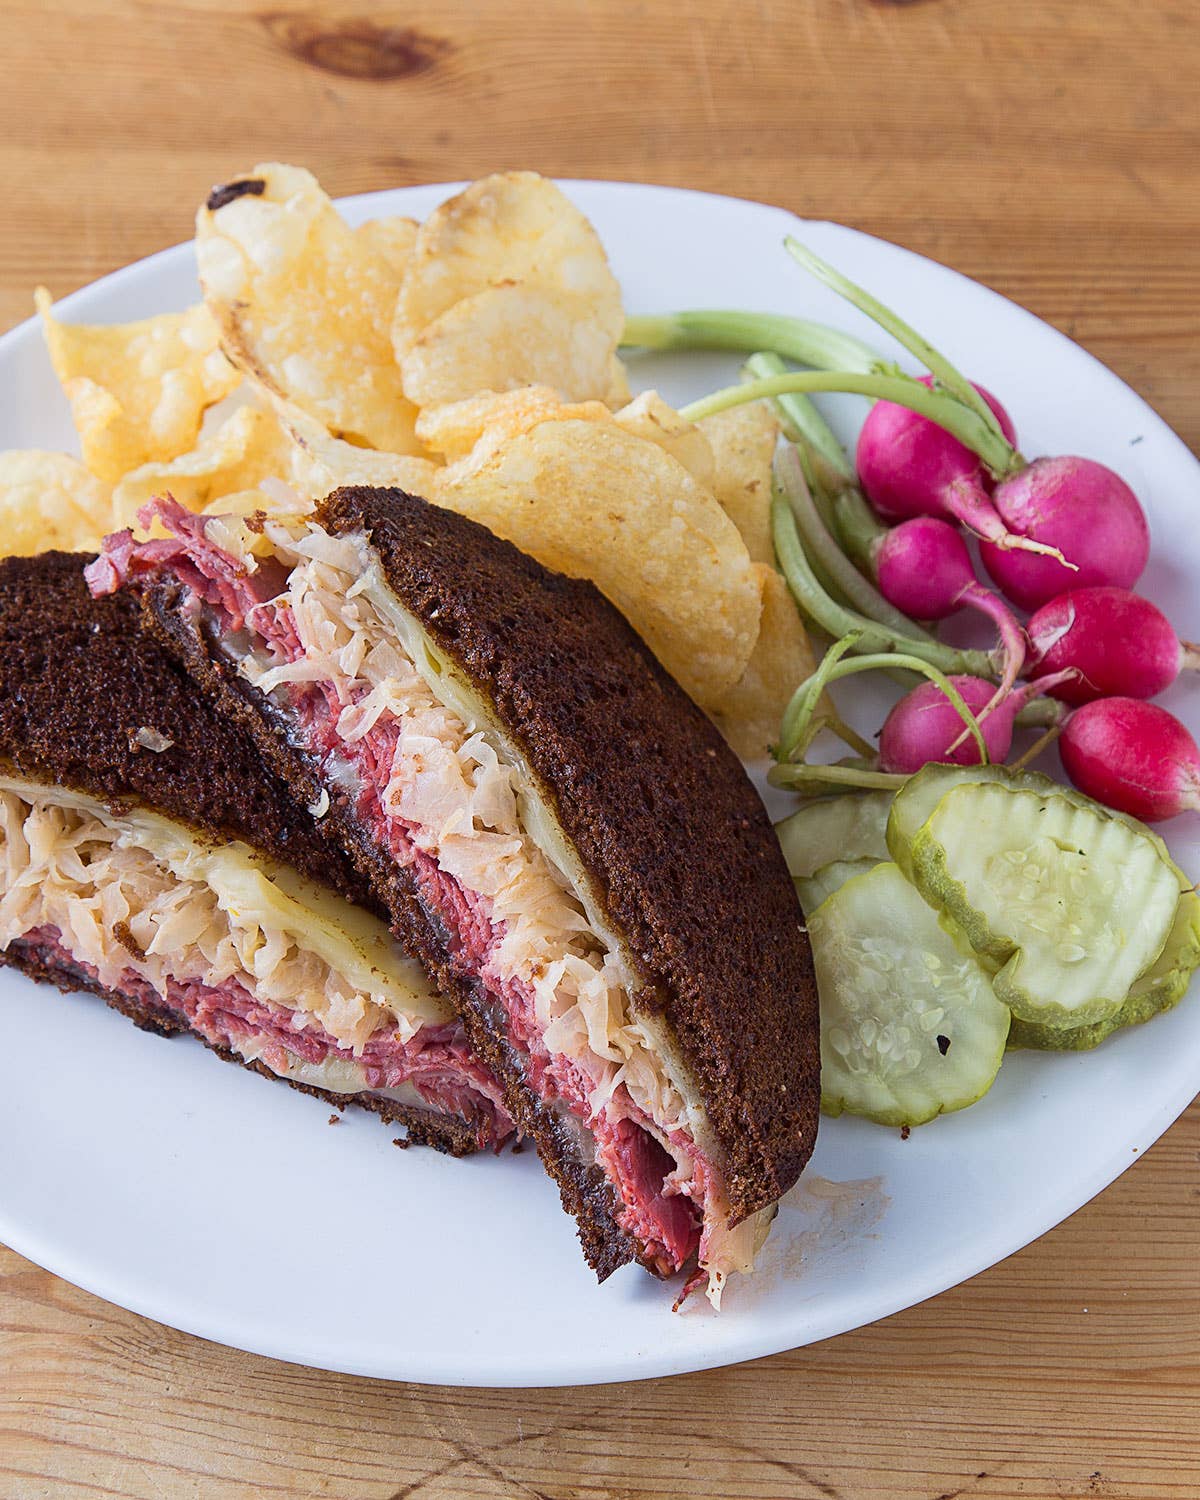 Who Really Invented the Reuben?